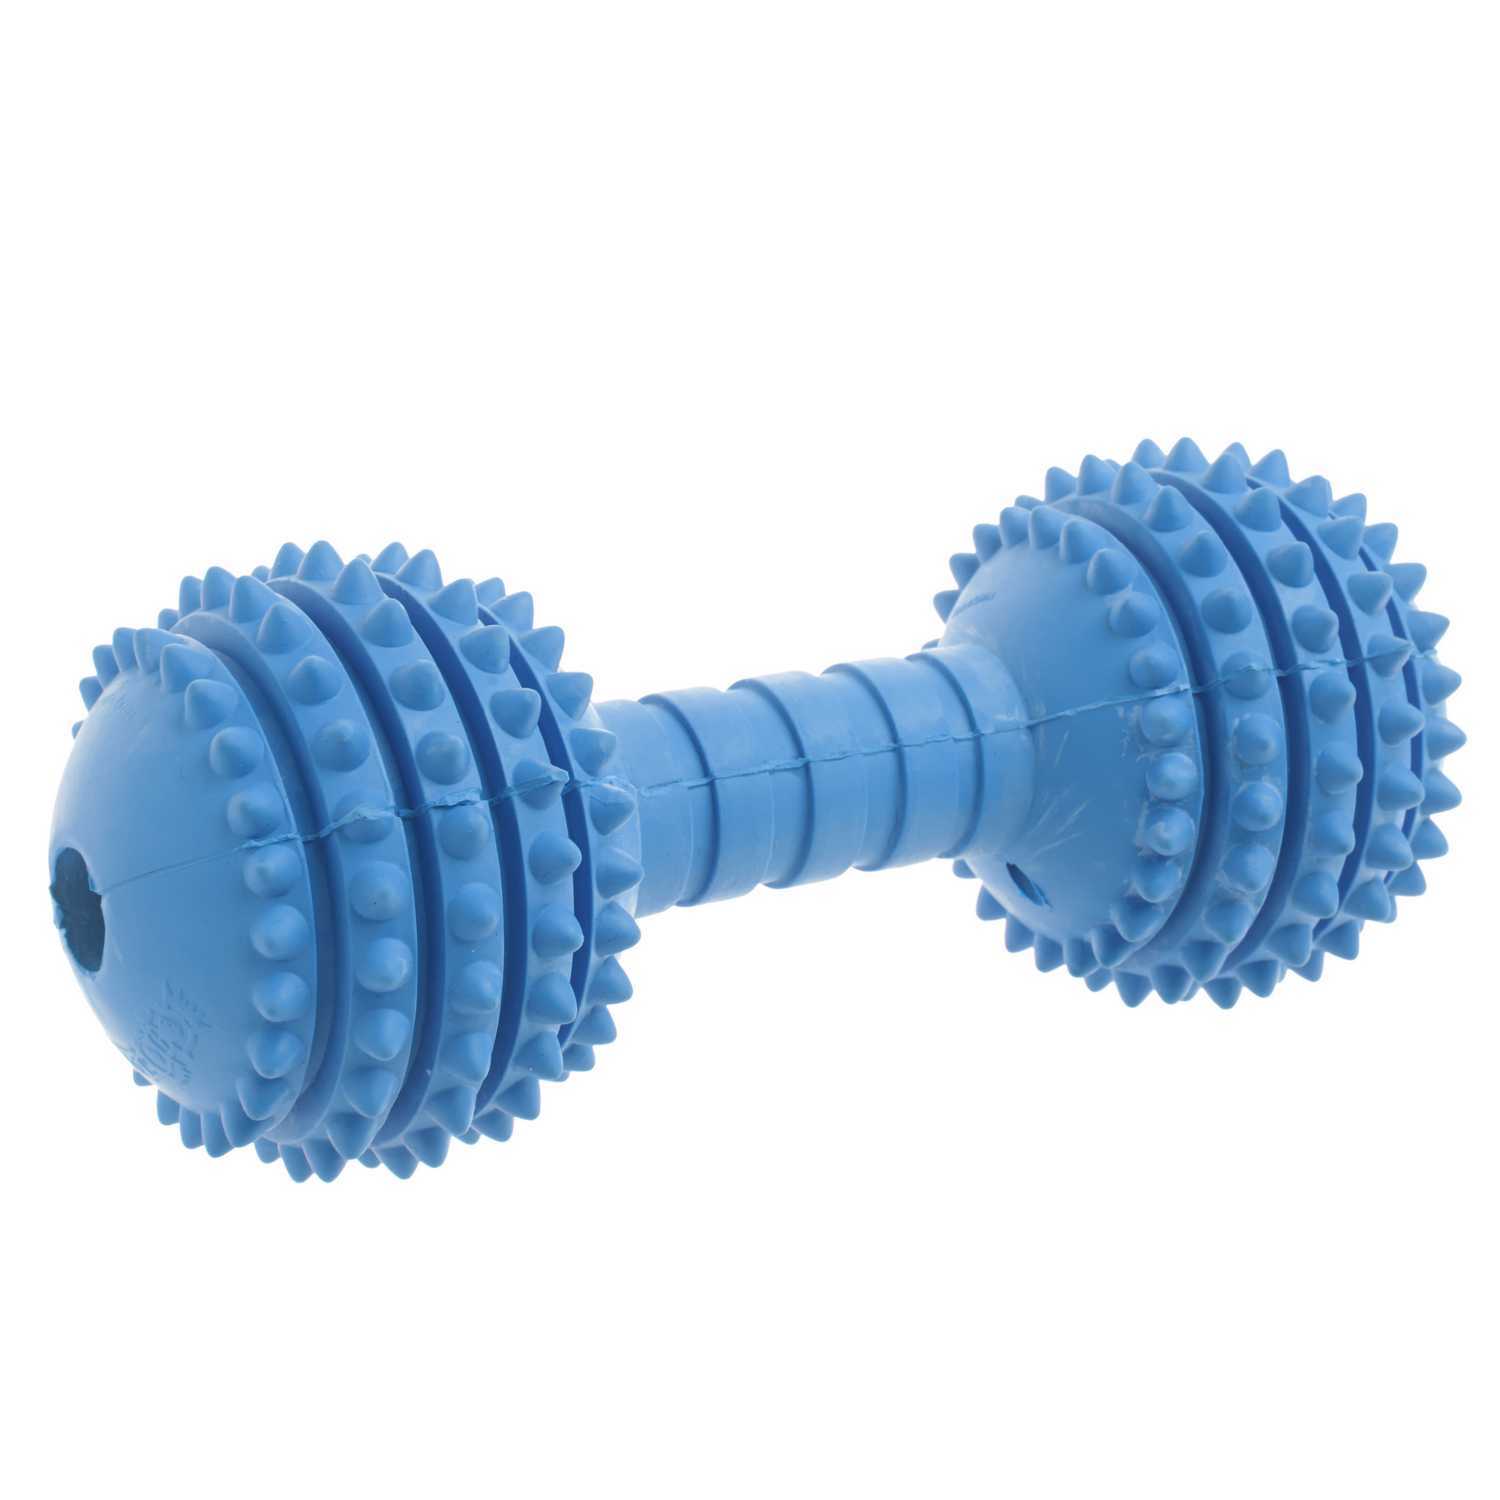 Cyber Dog Asteroid Dumbbell Dog Toy - 30cm Image 3